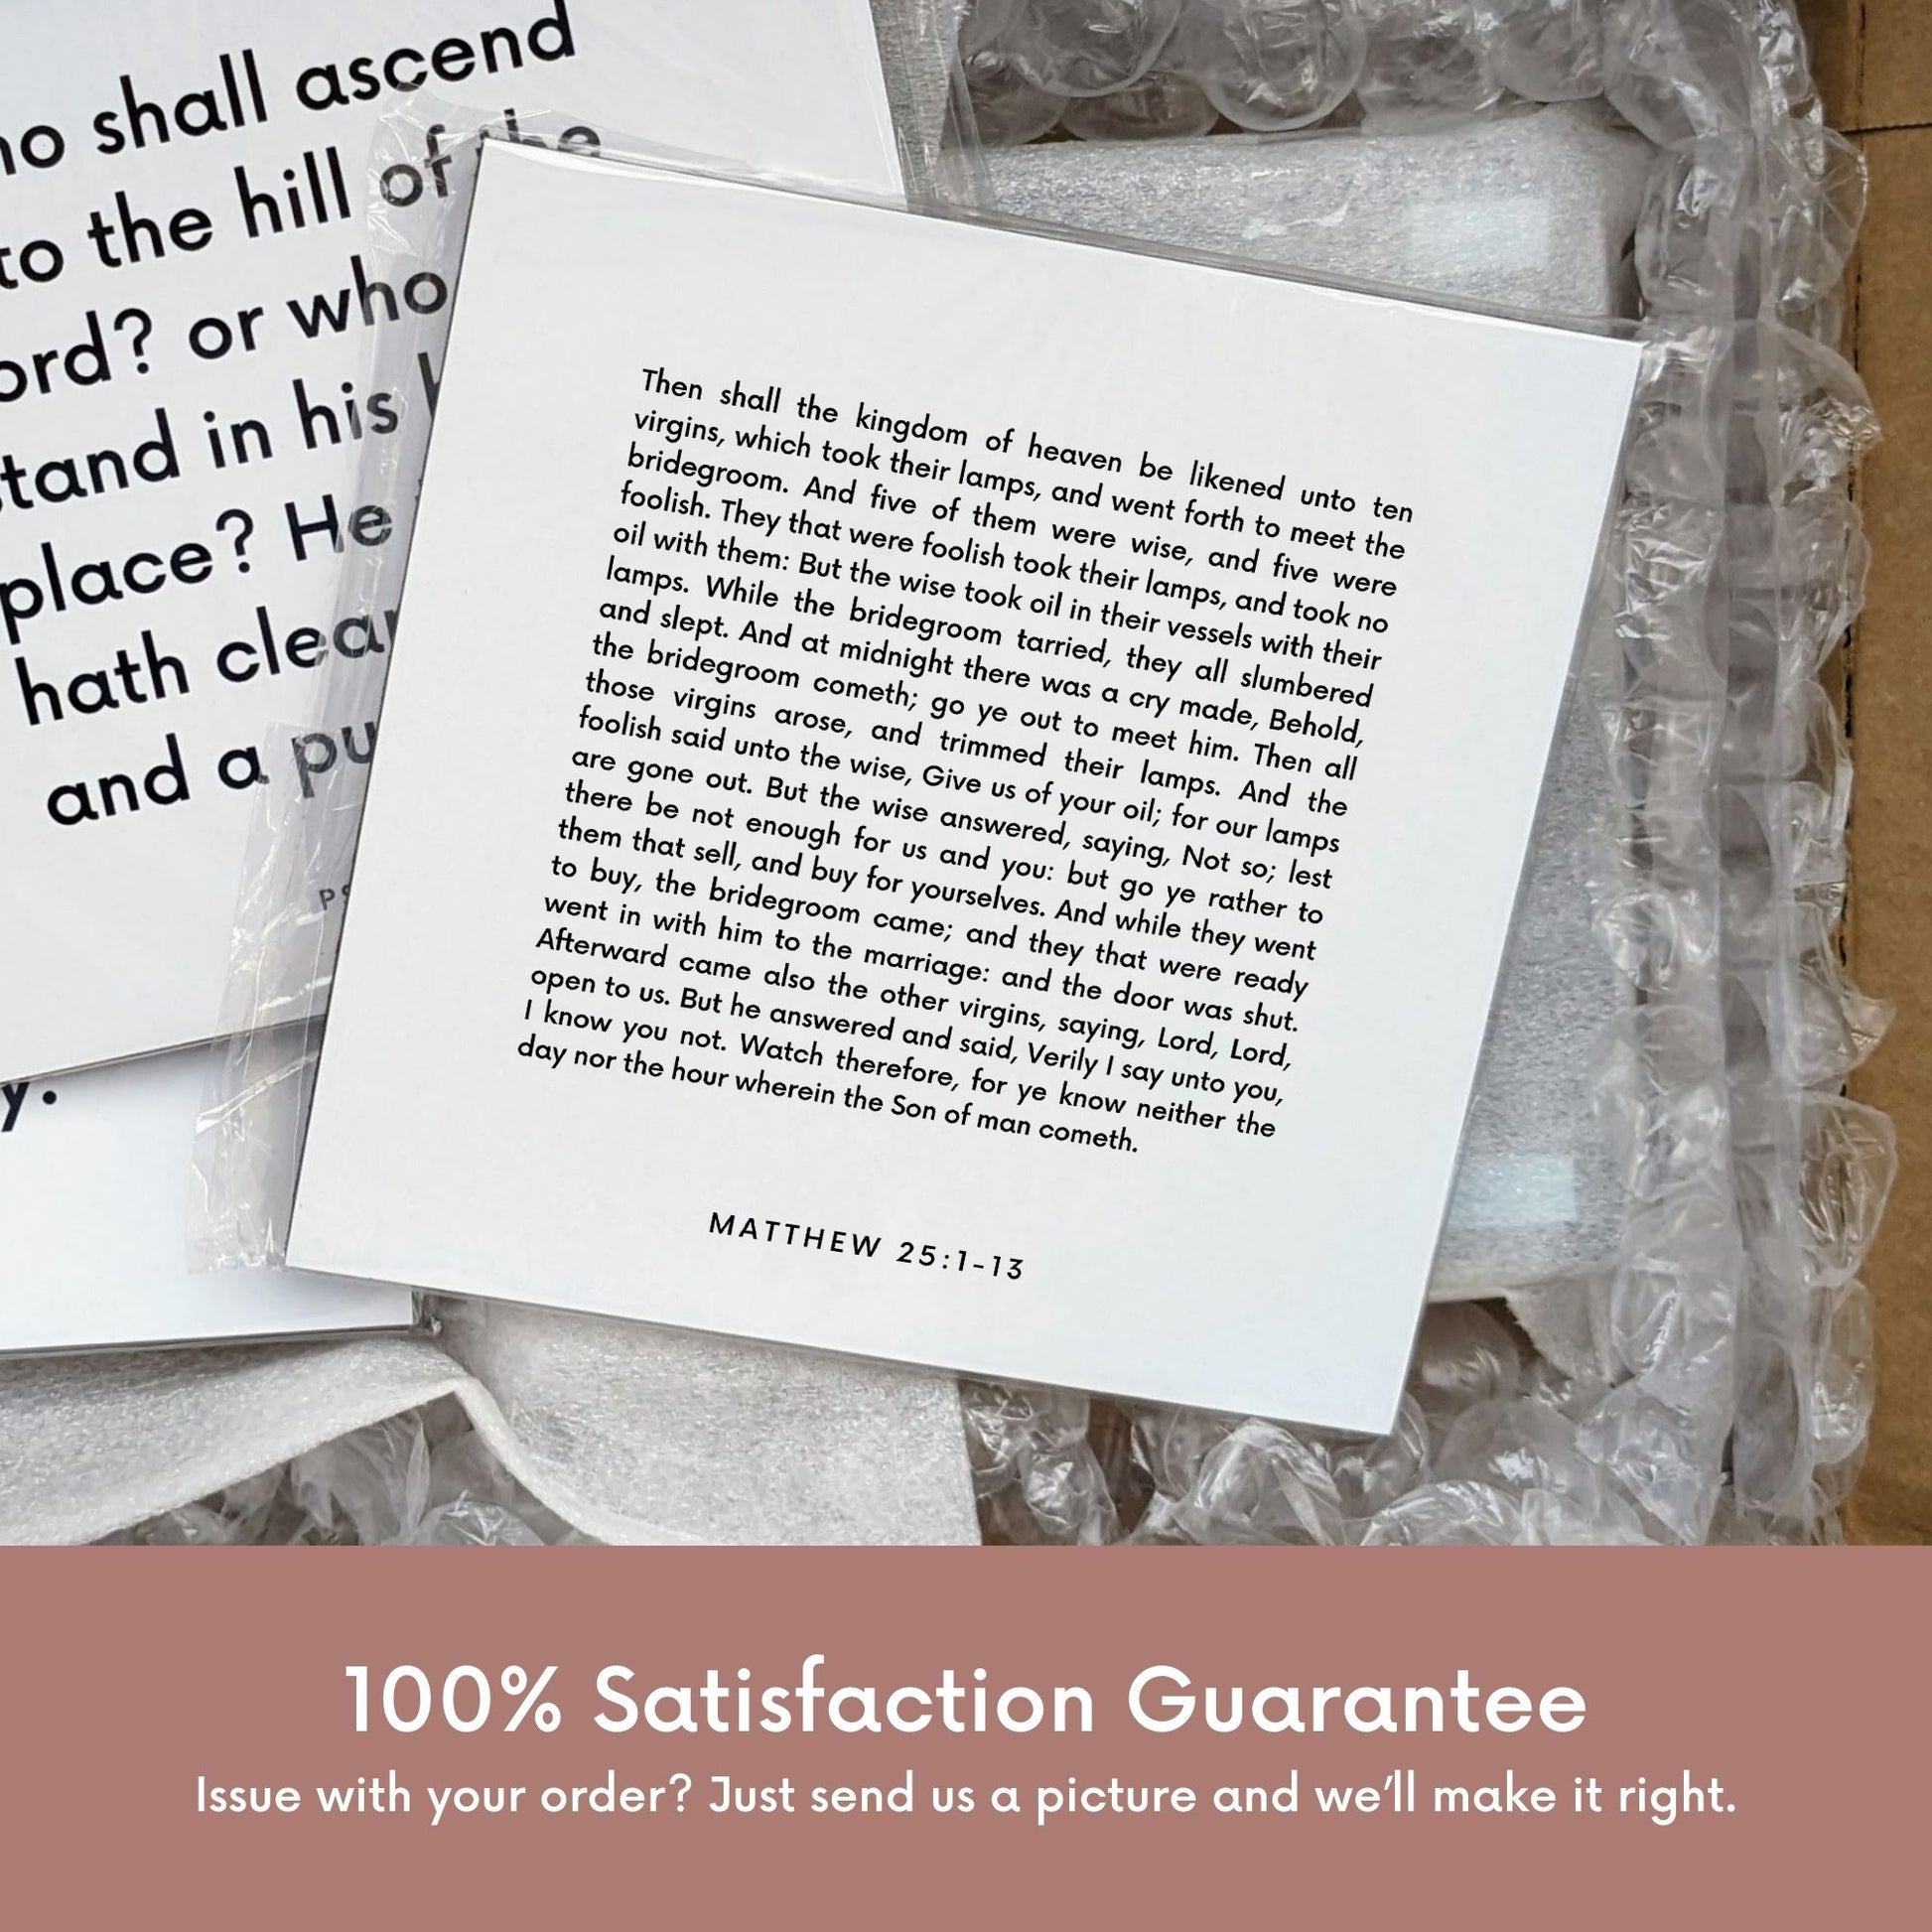 Shipping materials for scripture tile of Matthew 25:1-13 - "Five of them were wise"